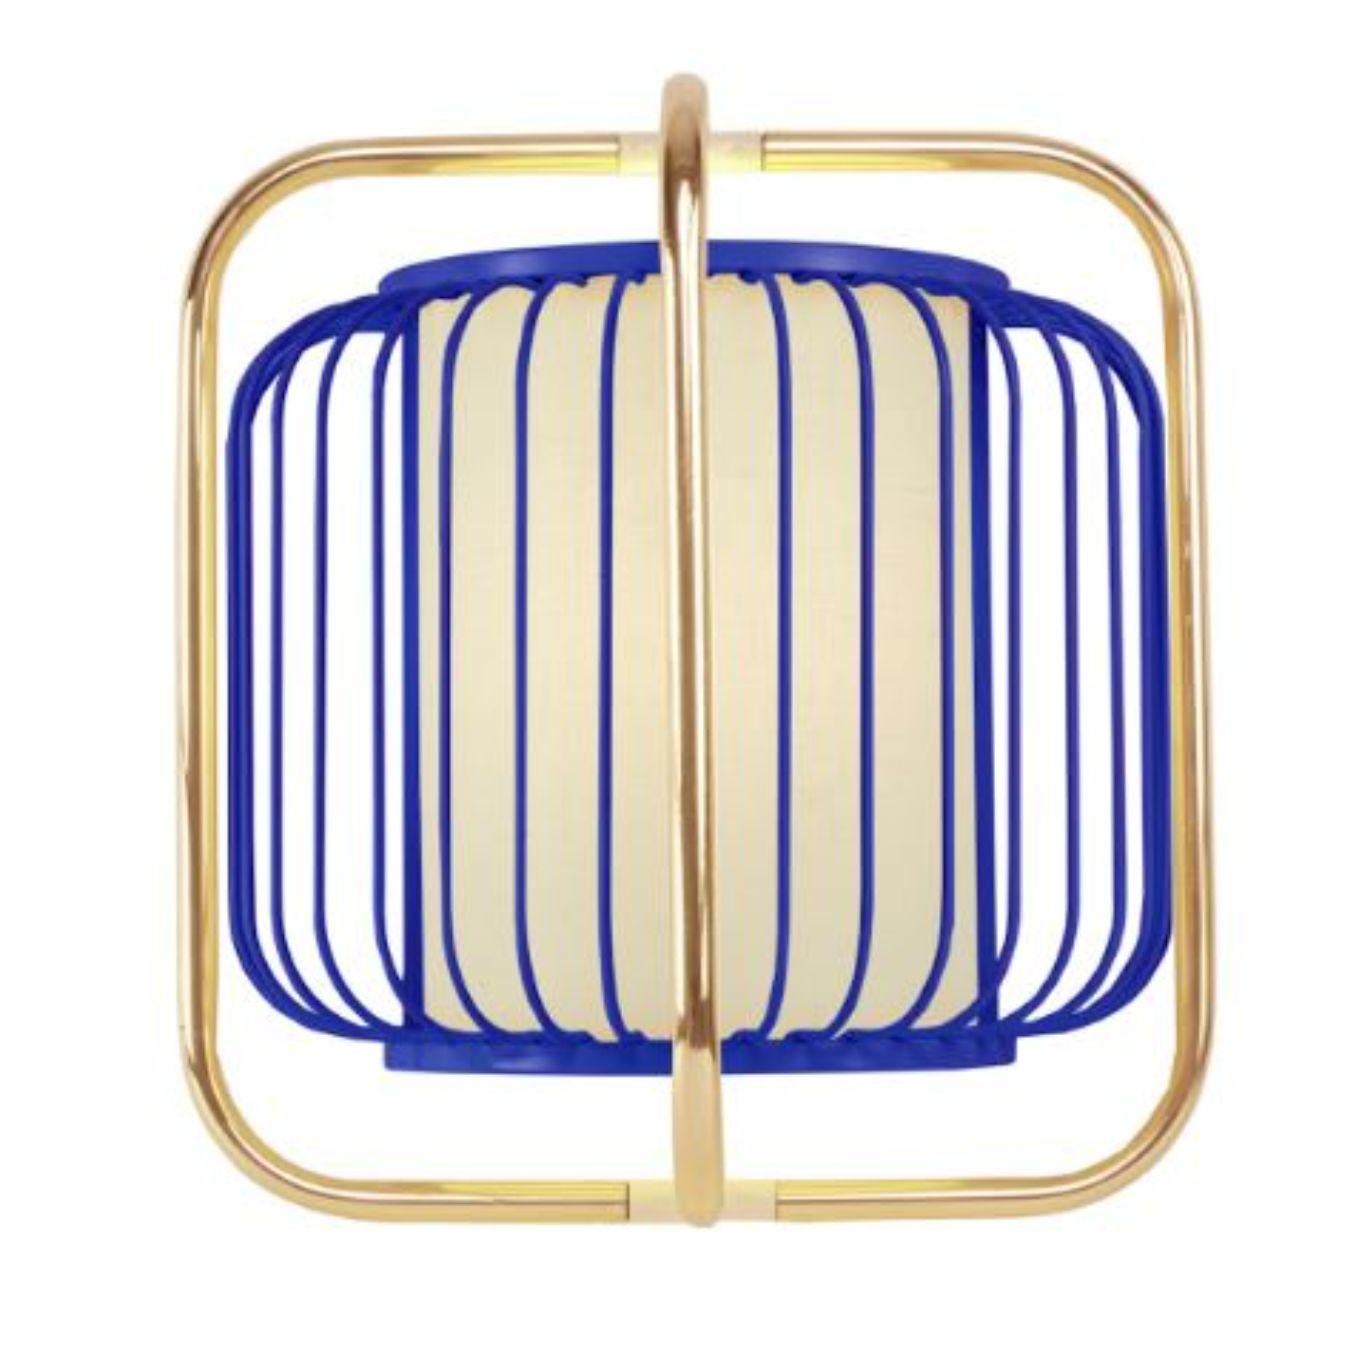 Brass and Cobalt Jules wall lamp by Dooq
Dimensions: W 40 x D 23 x H 40 cm
Materials: lacquered metal, polished or brushed metal, brass.
Abat-jour: cotton
Also available in different colors and materials.

Information:
230V/50Hz
E14/1x15W